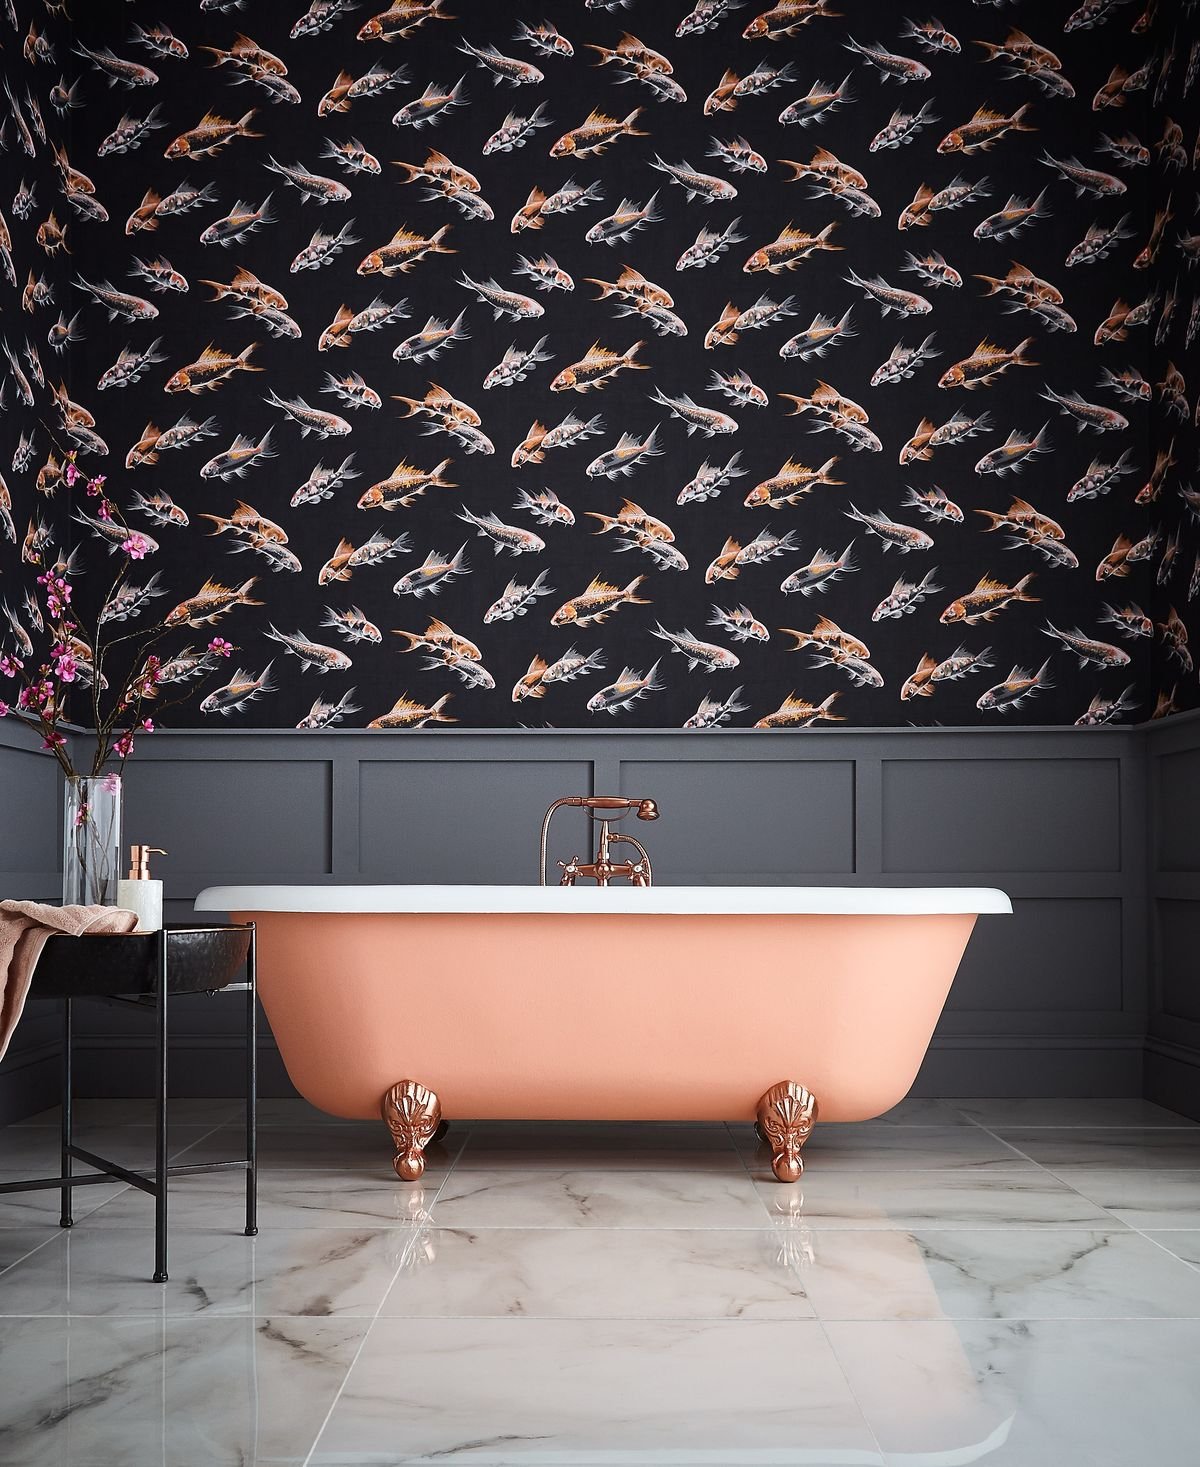 5 beautiful bathroom wallpaper ideas for character that's practical, too